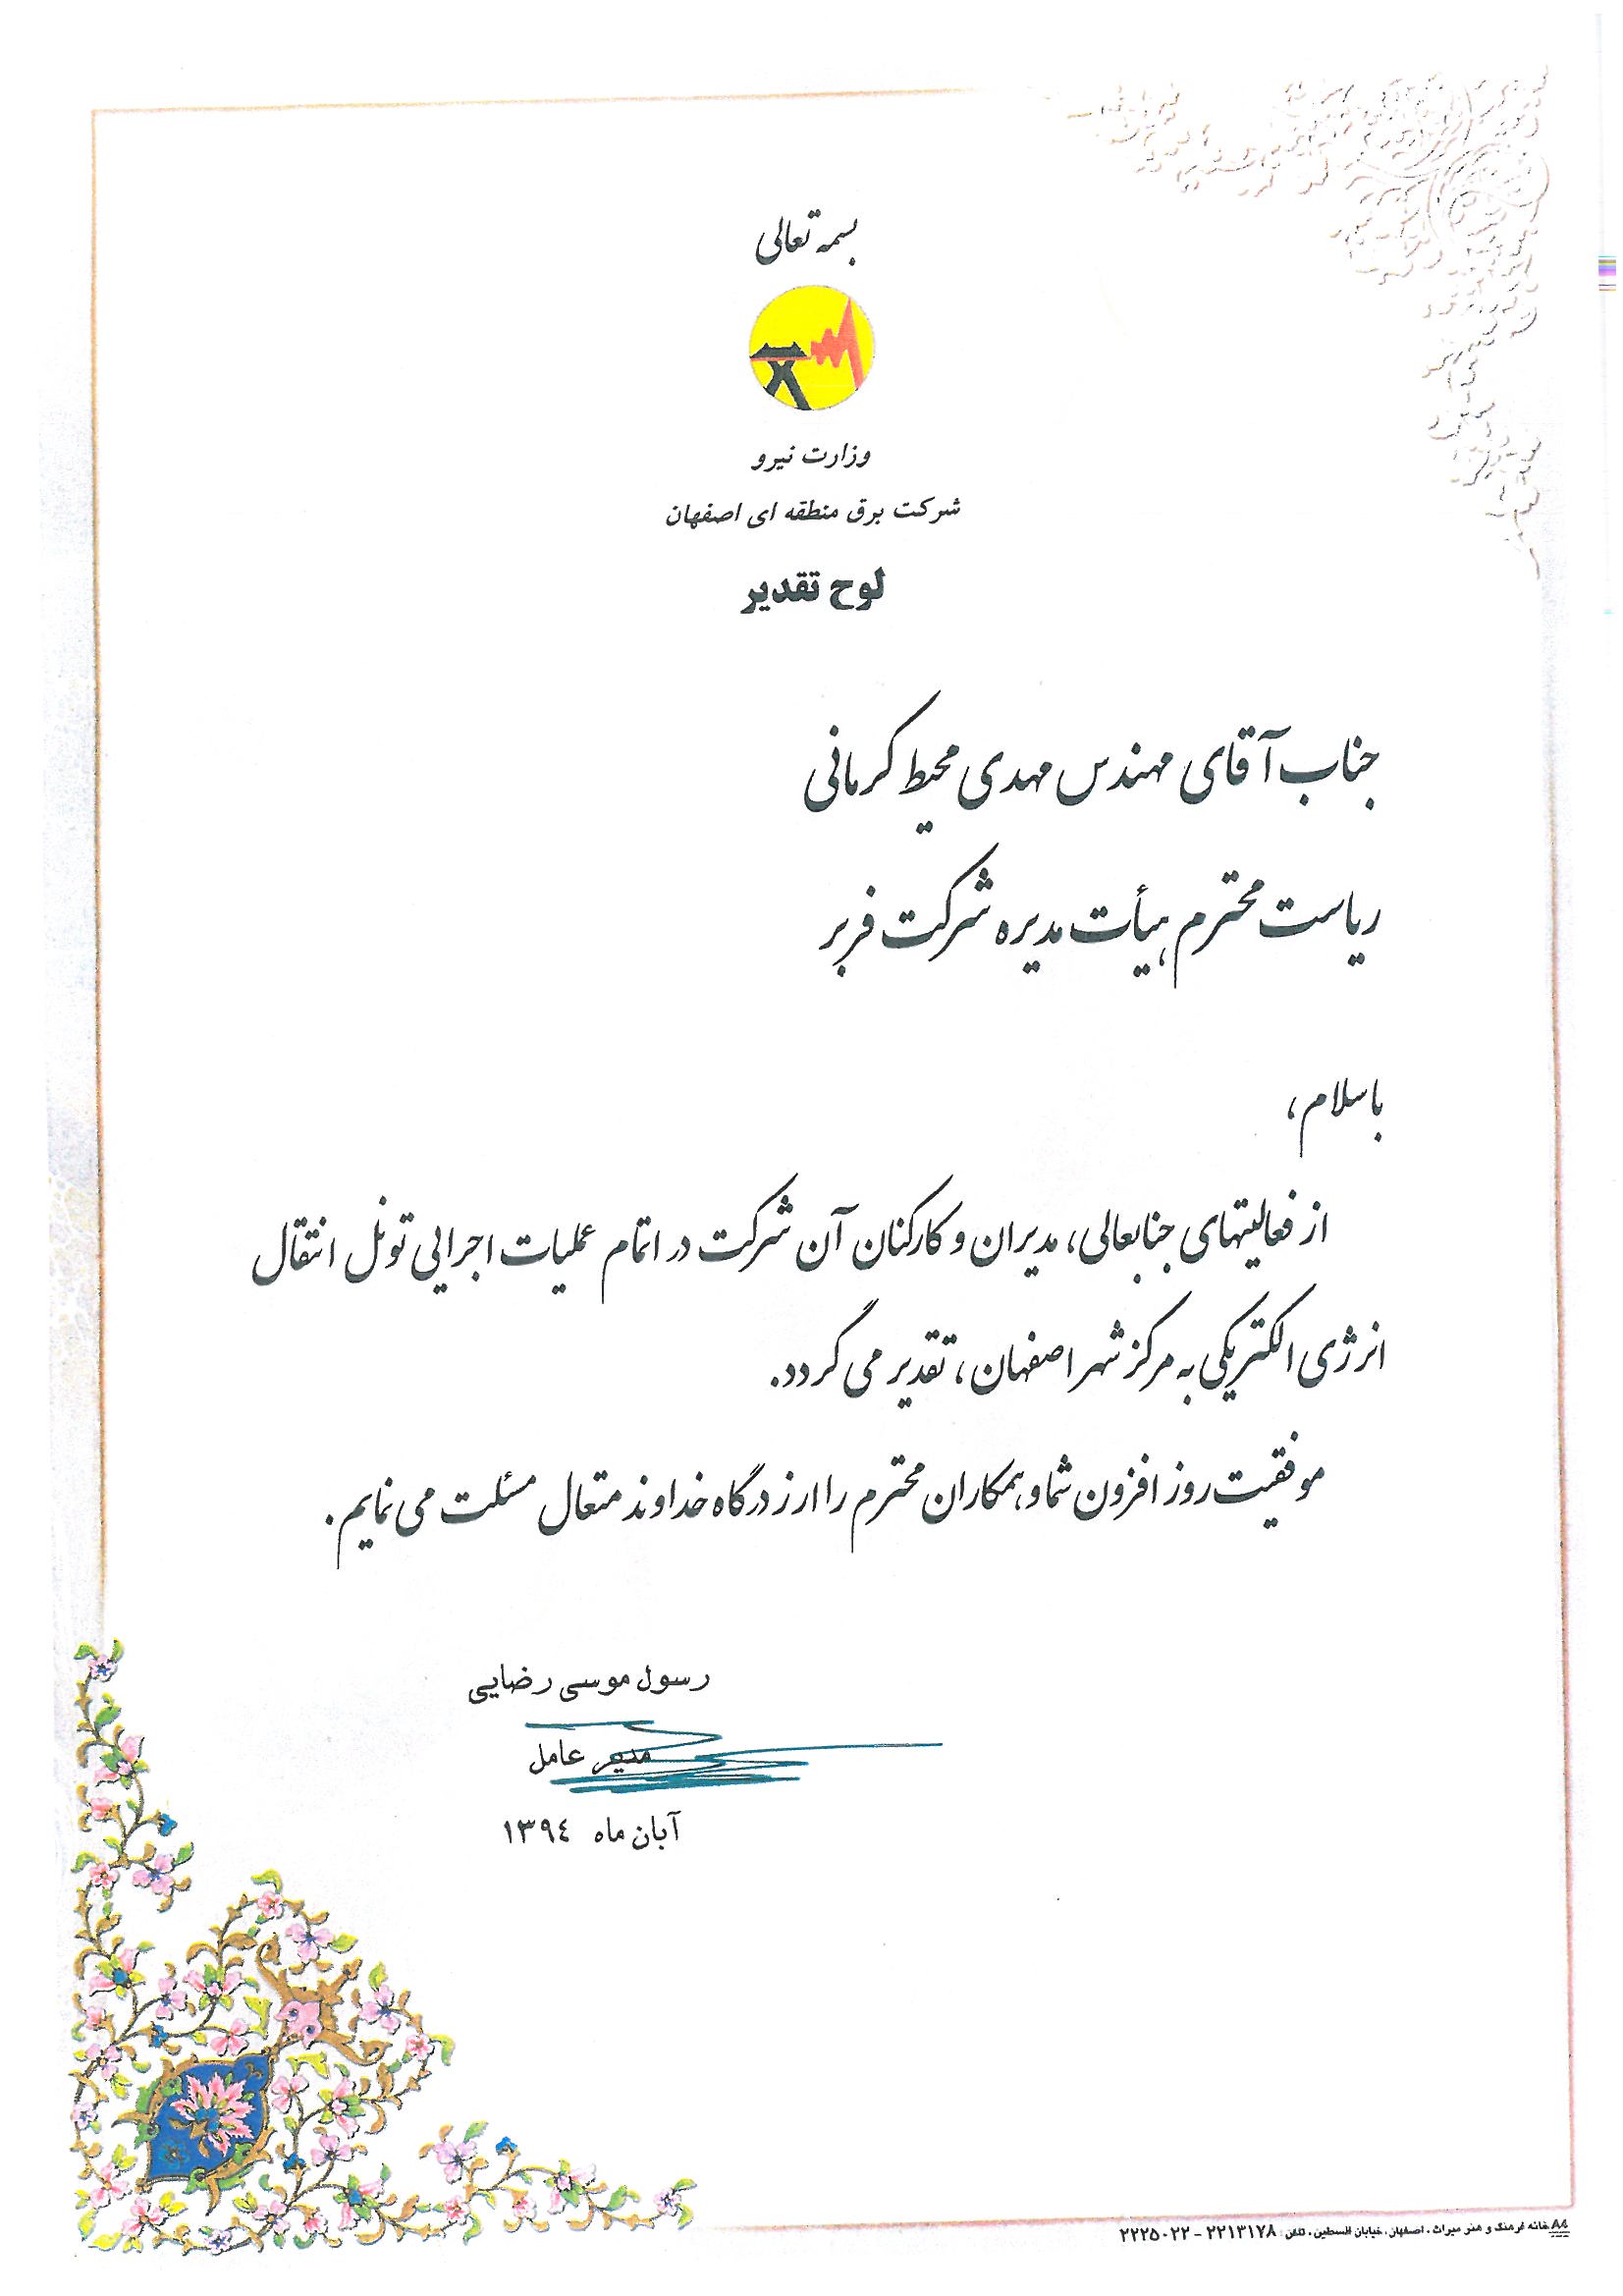 230 kV operation monitoring project - Certificate of Appreciation of Ministry of Energy for Completion of Operation of Electric Transmission Tunnel to Downtown Isfahan